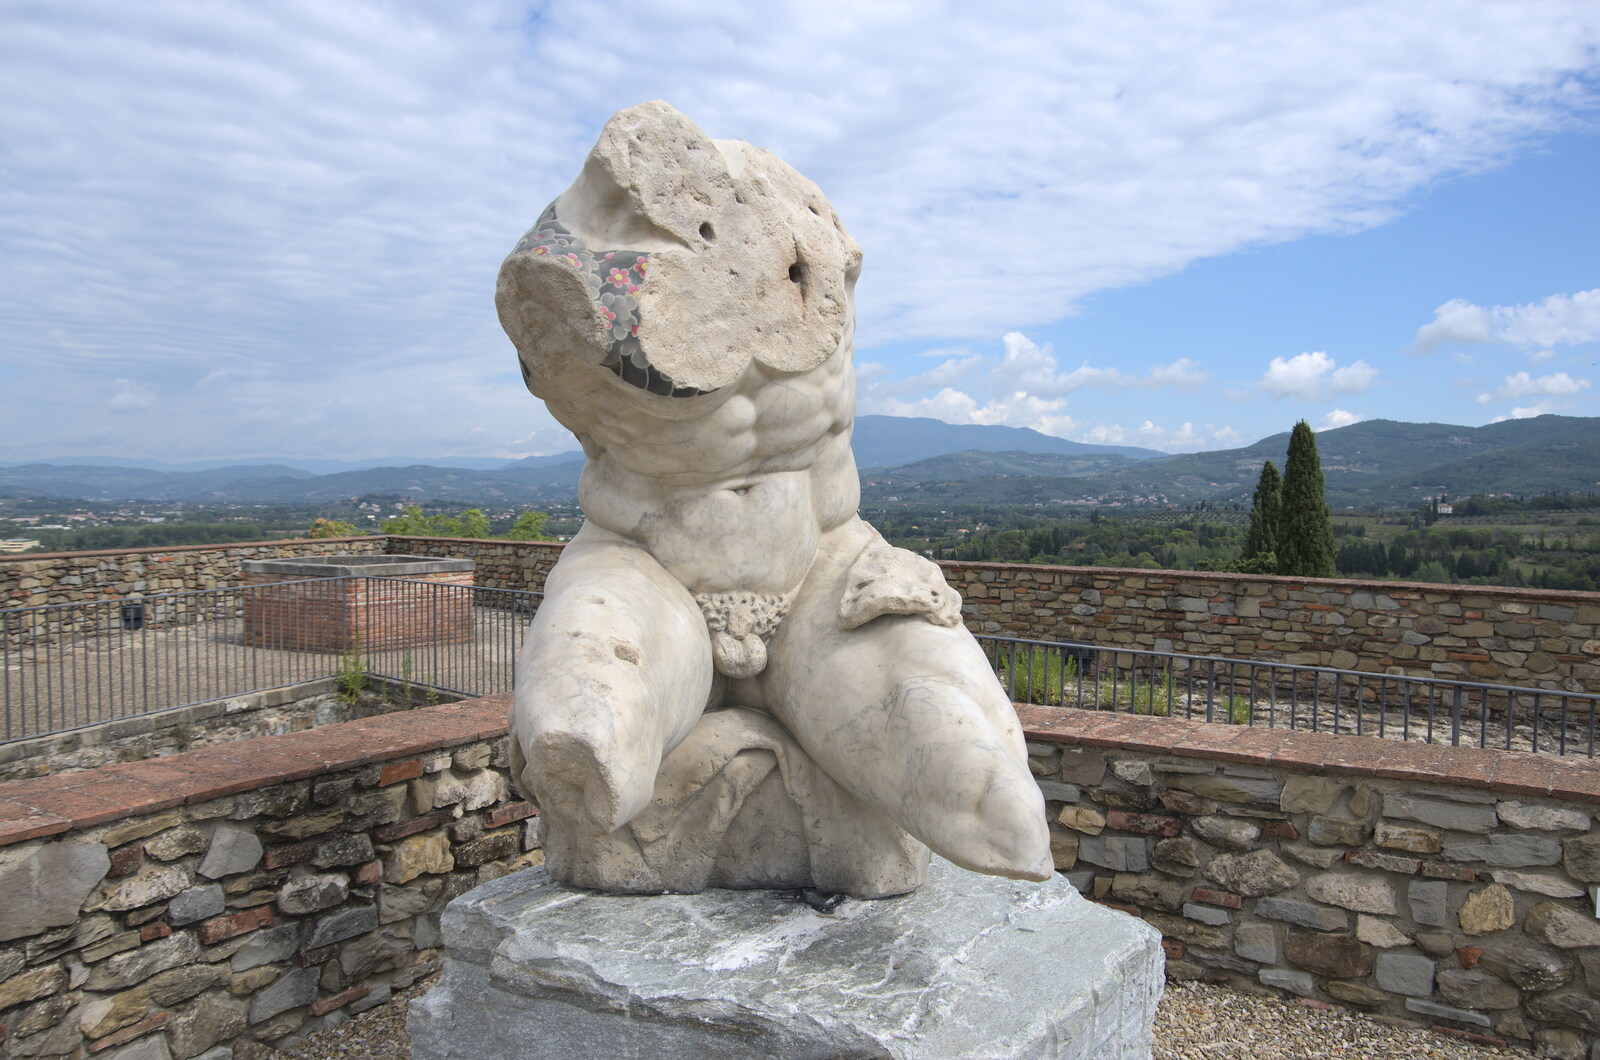 Castiglio Del Lago and Santuario della Verna, Umbria and Tuscany, Italy - 1st September 2022: Another sculpture on the top of the fortress